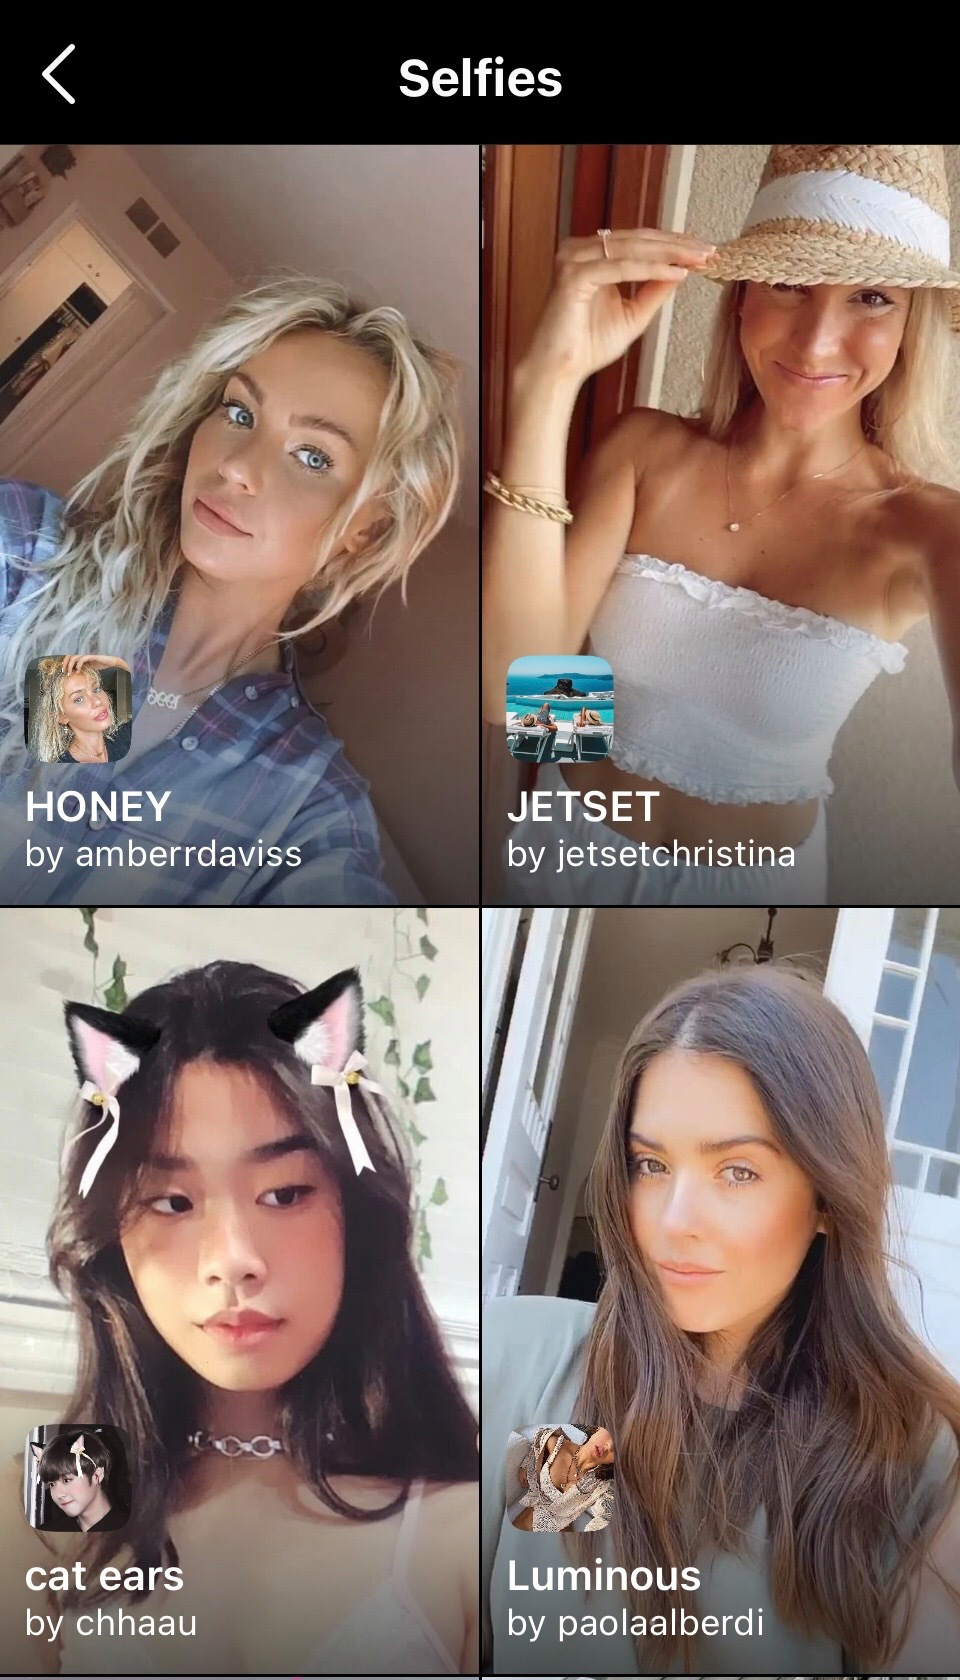 How beauty filters took over